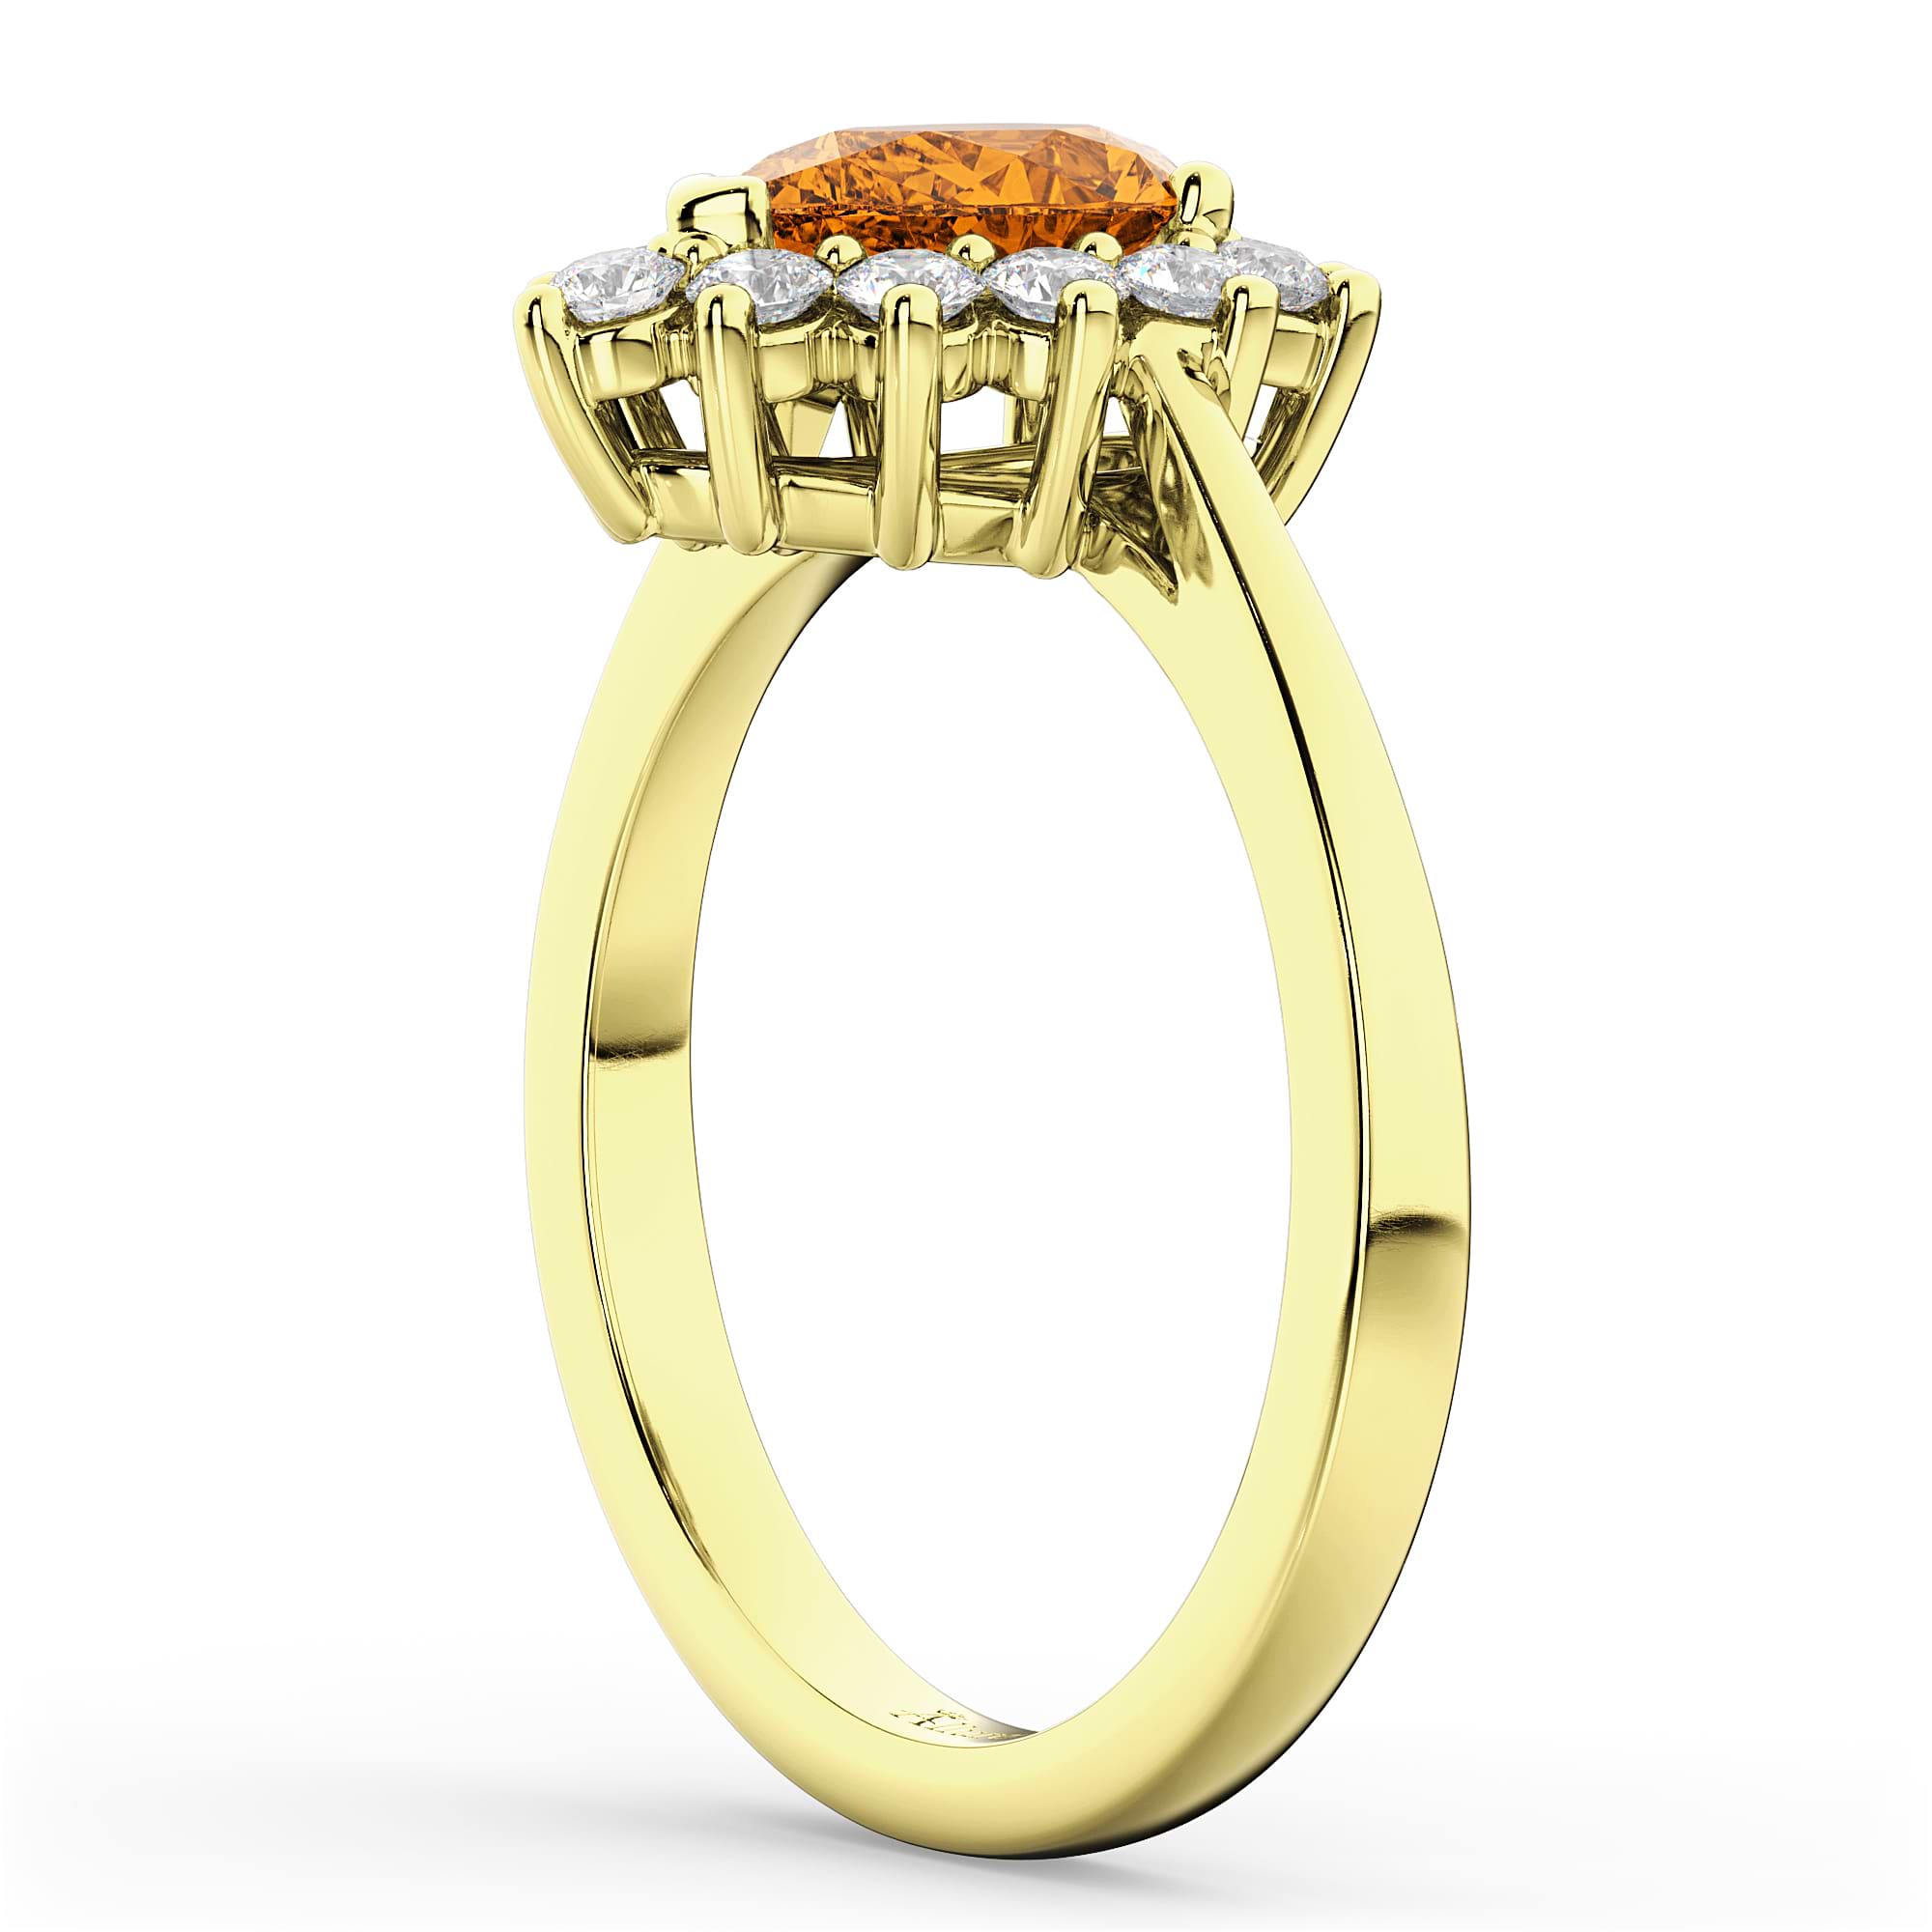 Halo Citrine & Diamond Floral Pear Shaped Fashion Ring 14k Yellow Gold (1.07ct)